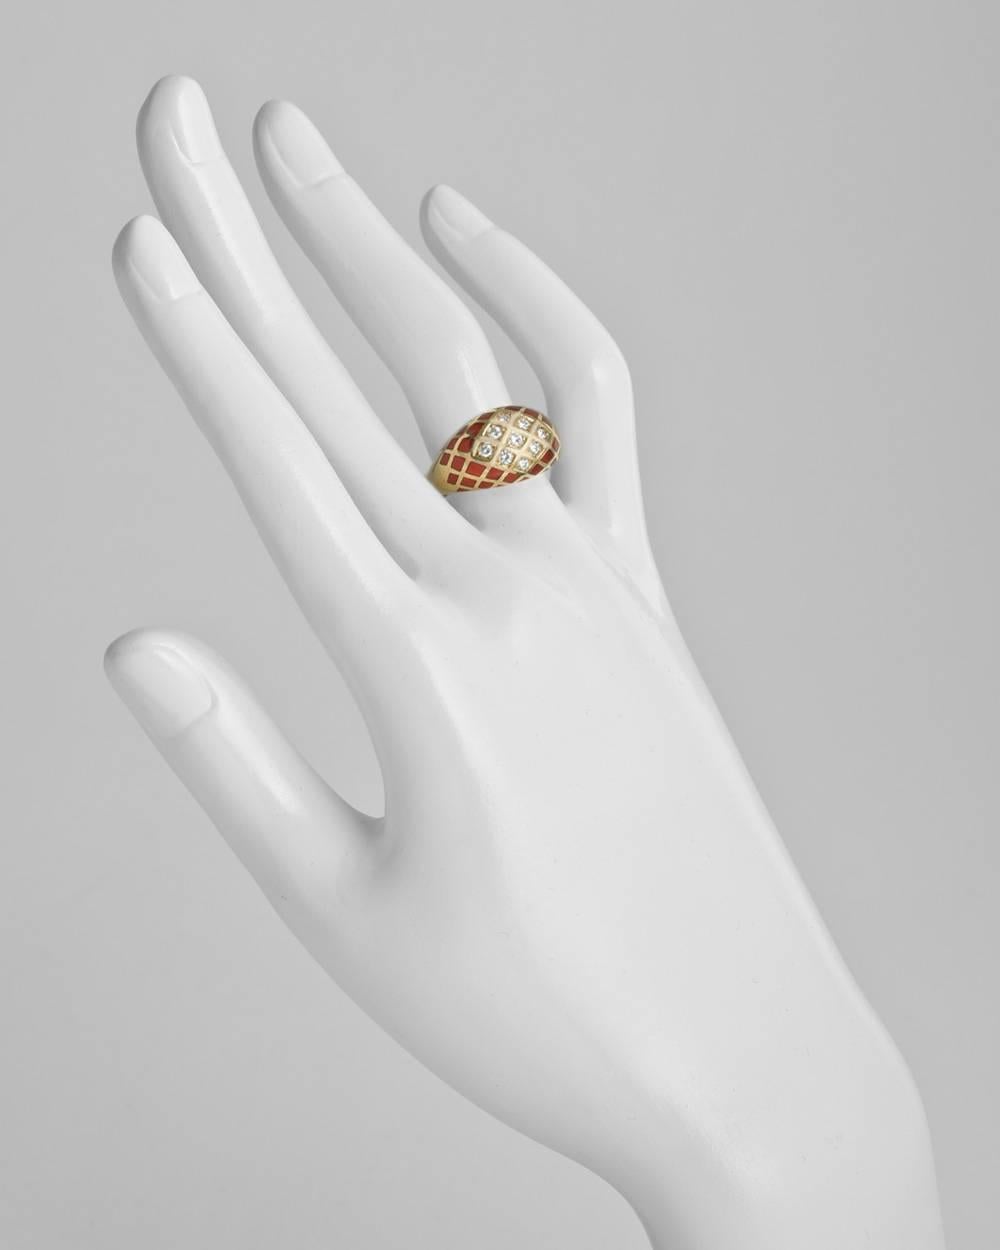 Red enamel and diamond harlequin patterned dome ring in 18k yellow gold, style number P16456, with nine full cut round diamonds weighing 0.18 total carats of F color and VVS clarity, signed Mauboussin Paris. Size 6.25